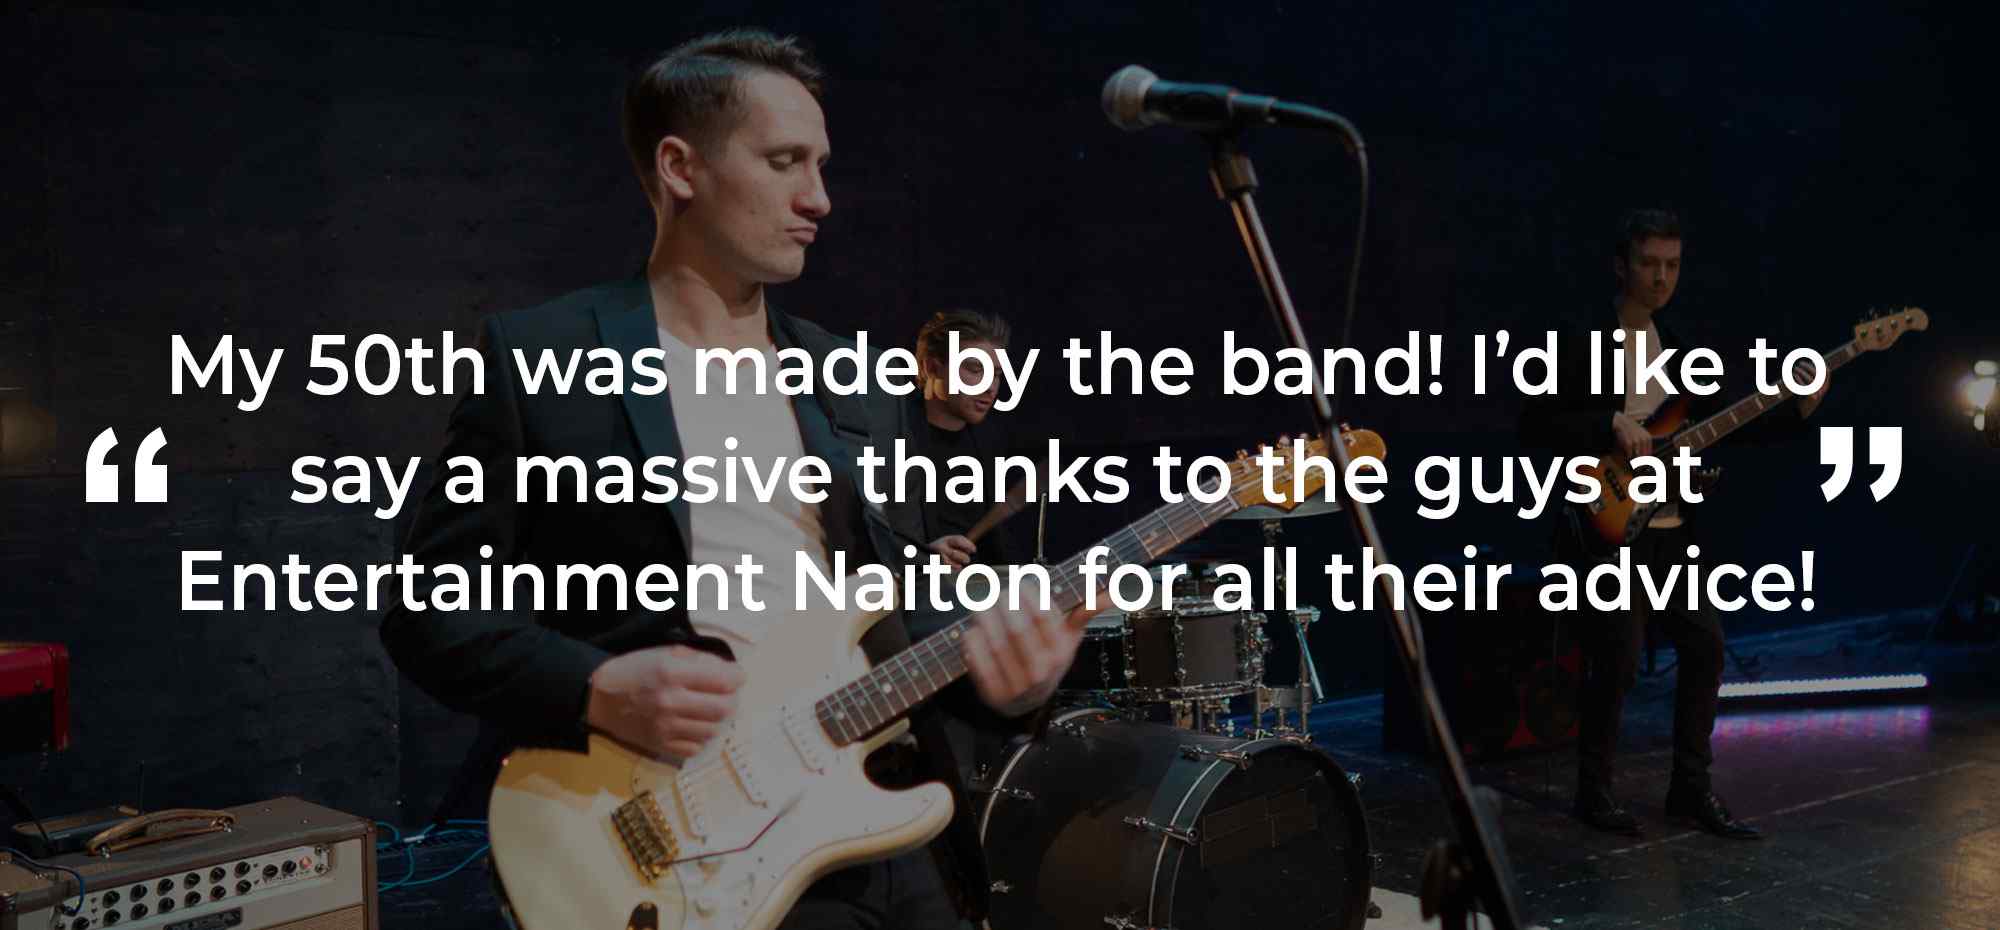 Client Review of a Party Band Gwynedd